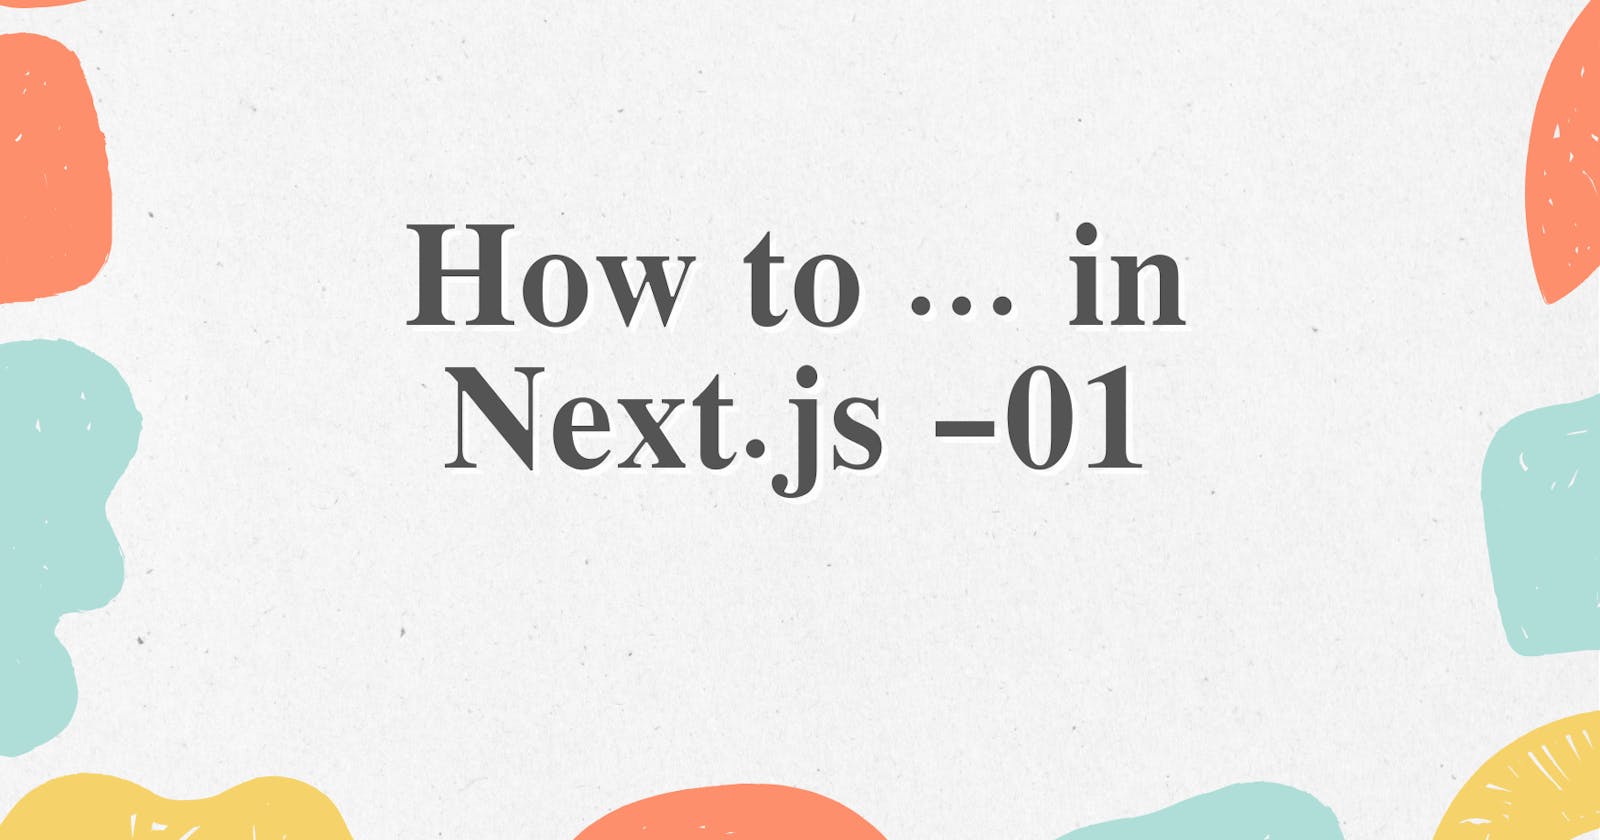 How to ... in Next.js -01